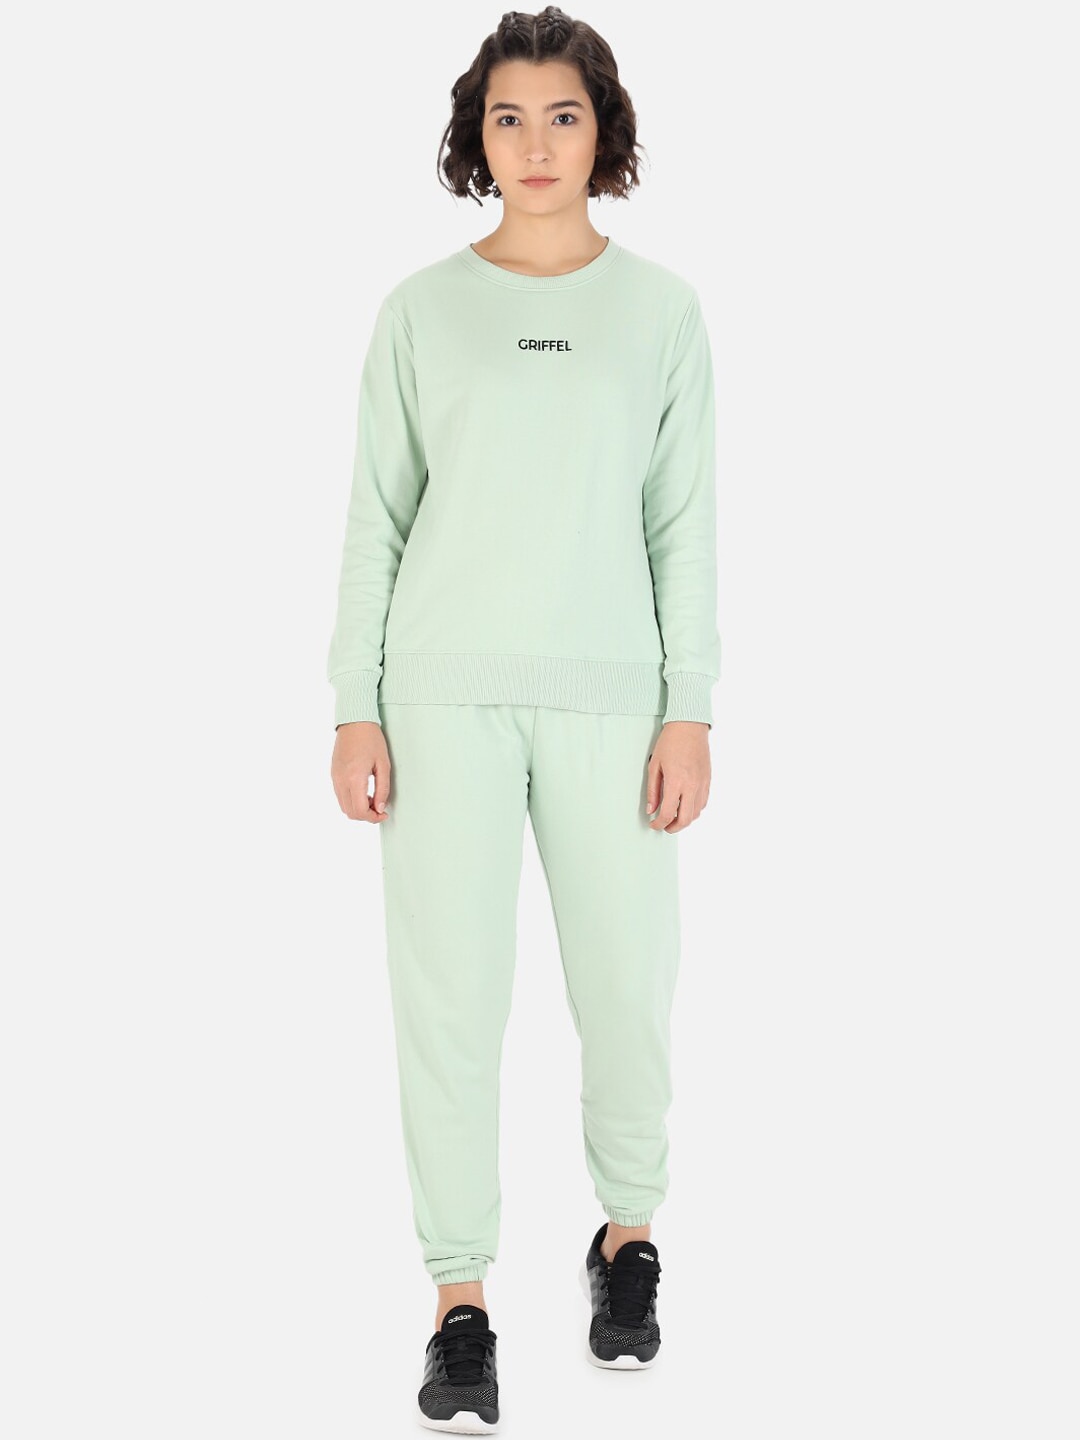 GRIFFEL Women Sea-Green Solid Cotton Tracksuit Price in India